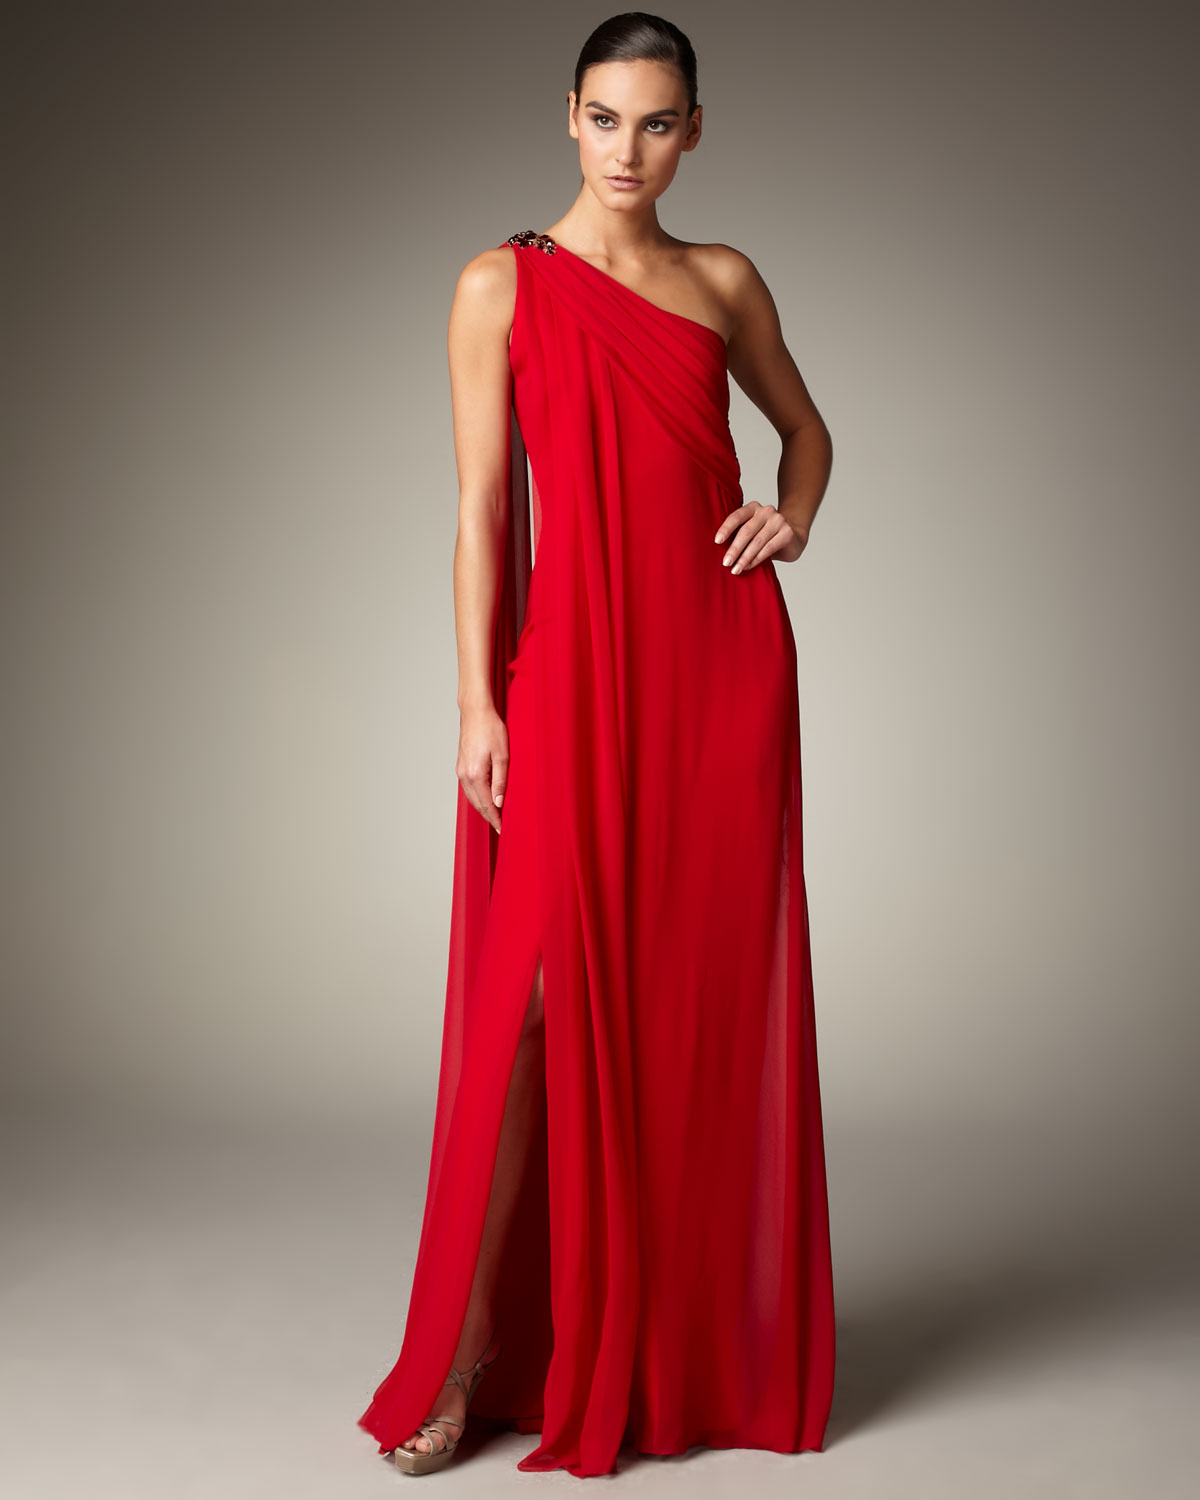 Lyst - Notte By Marchesa Bejeweled One-shoulder Gown in Red